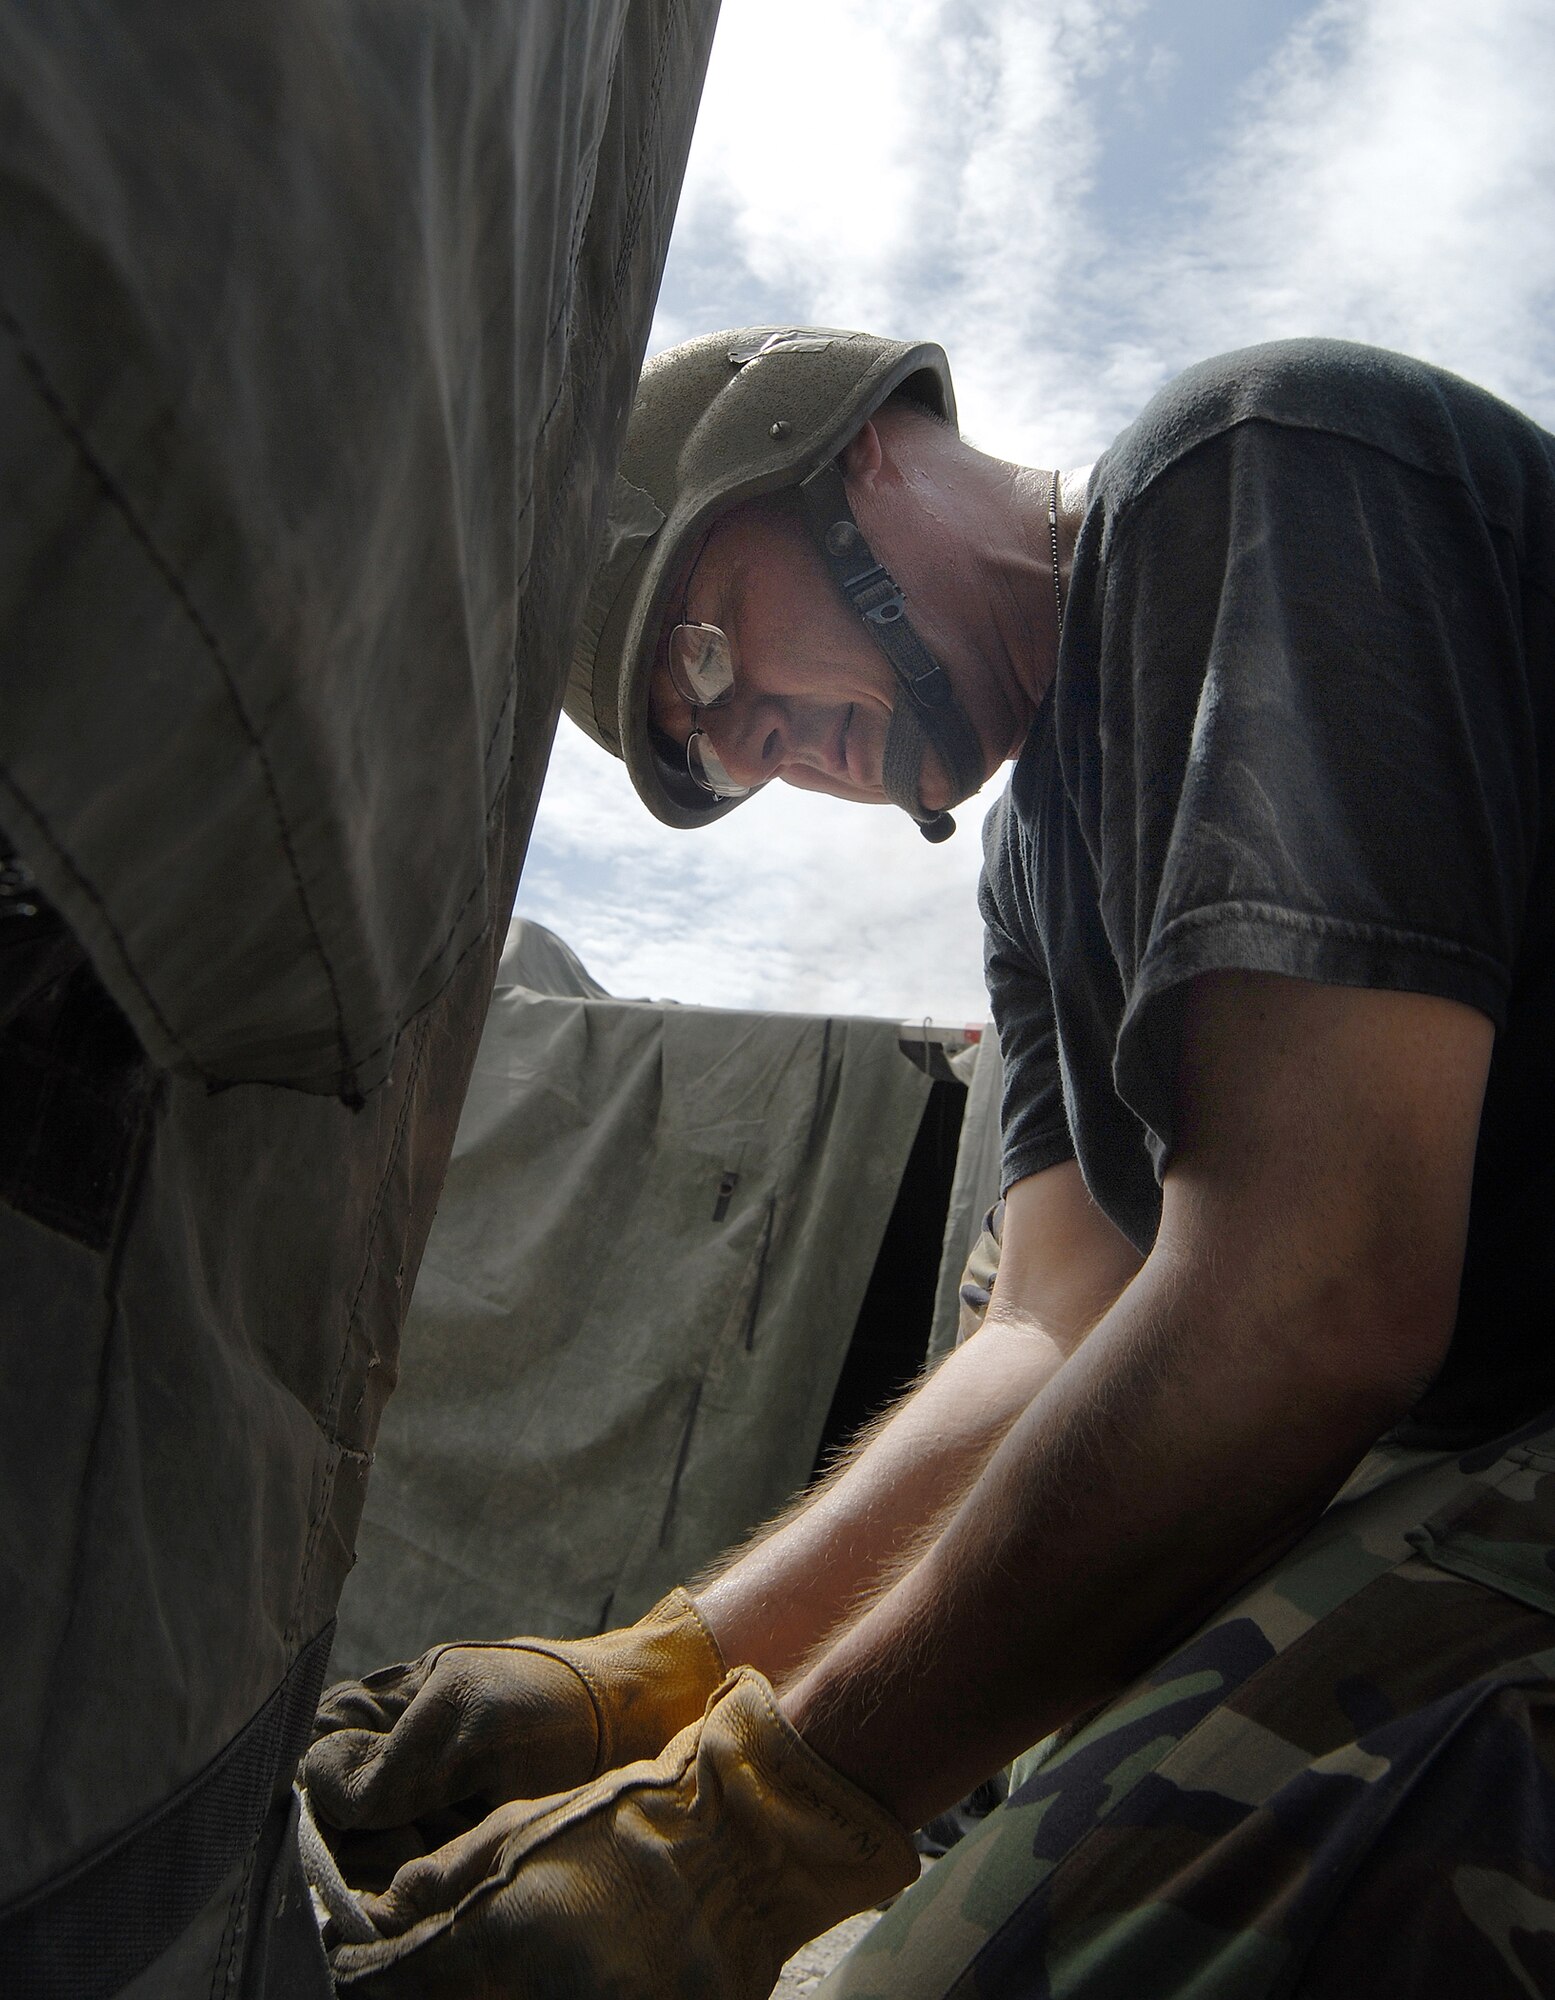 Staff Sgt. Thomas Wilkes works to set up a tent to be used as a shelter during the 442nd Civil Engineer Squadron's July deployment to the Silver Flag exercise held near Tyndall AFB, Fla. Sergeant Wilkes and other reservists from Whiteman Air Force Base, Mo., deployed to the exercise site to hone their contingency skills. (US Air Force photo/ Master Sgt. Bill Huntington)